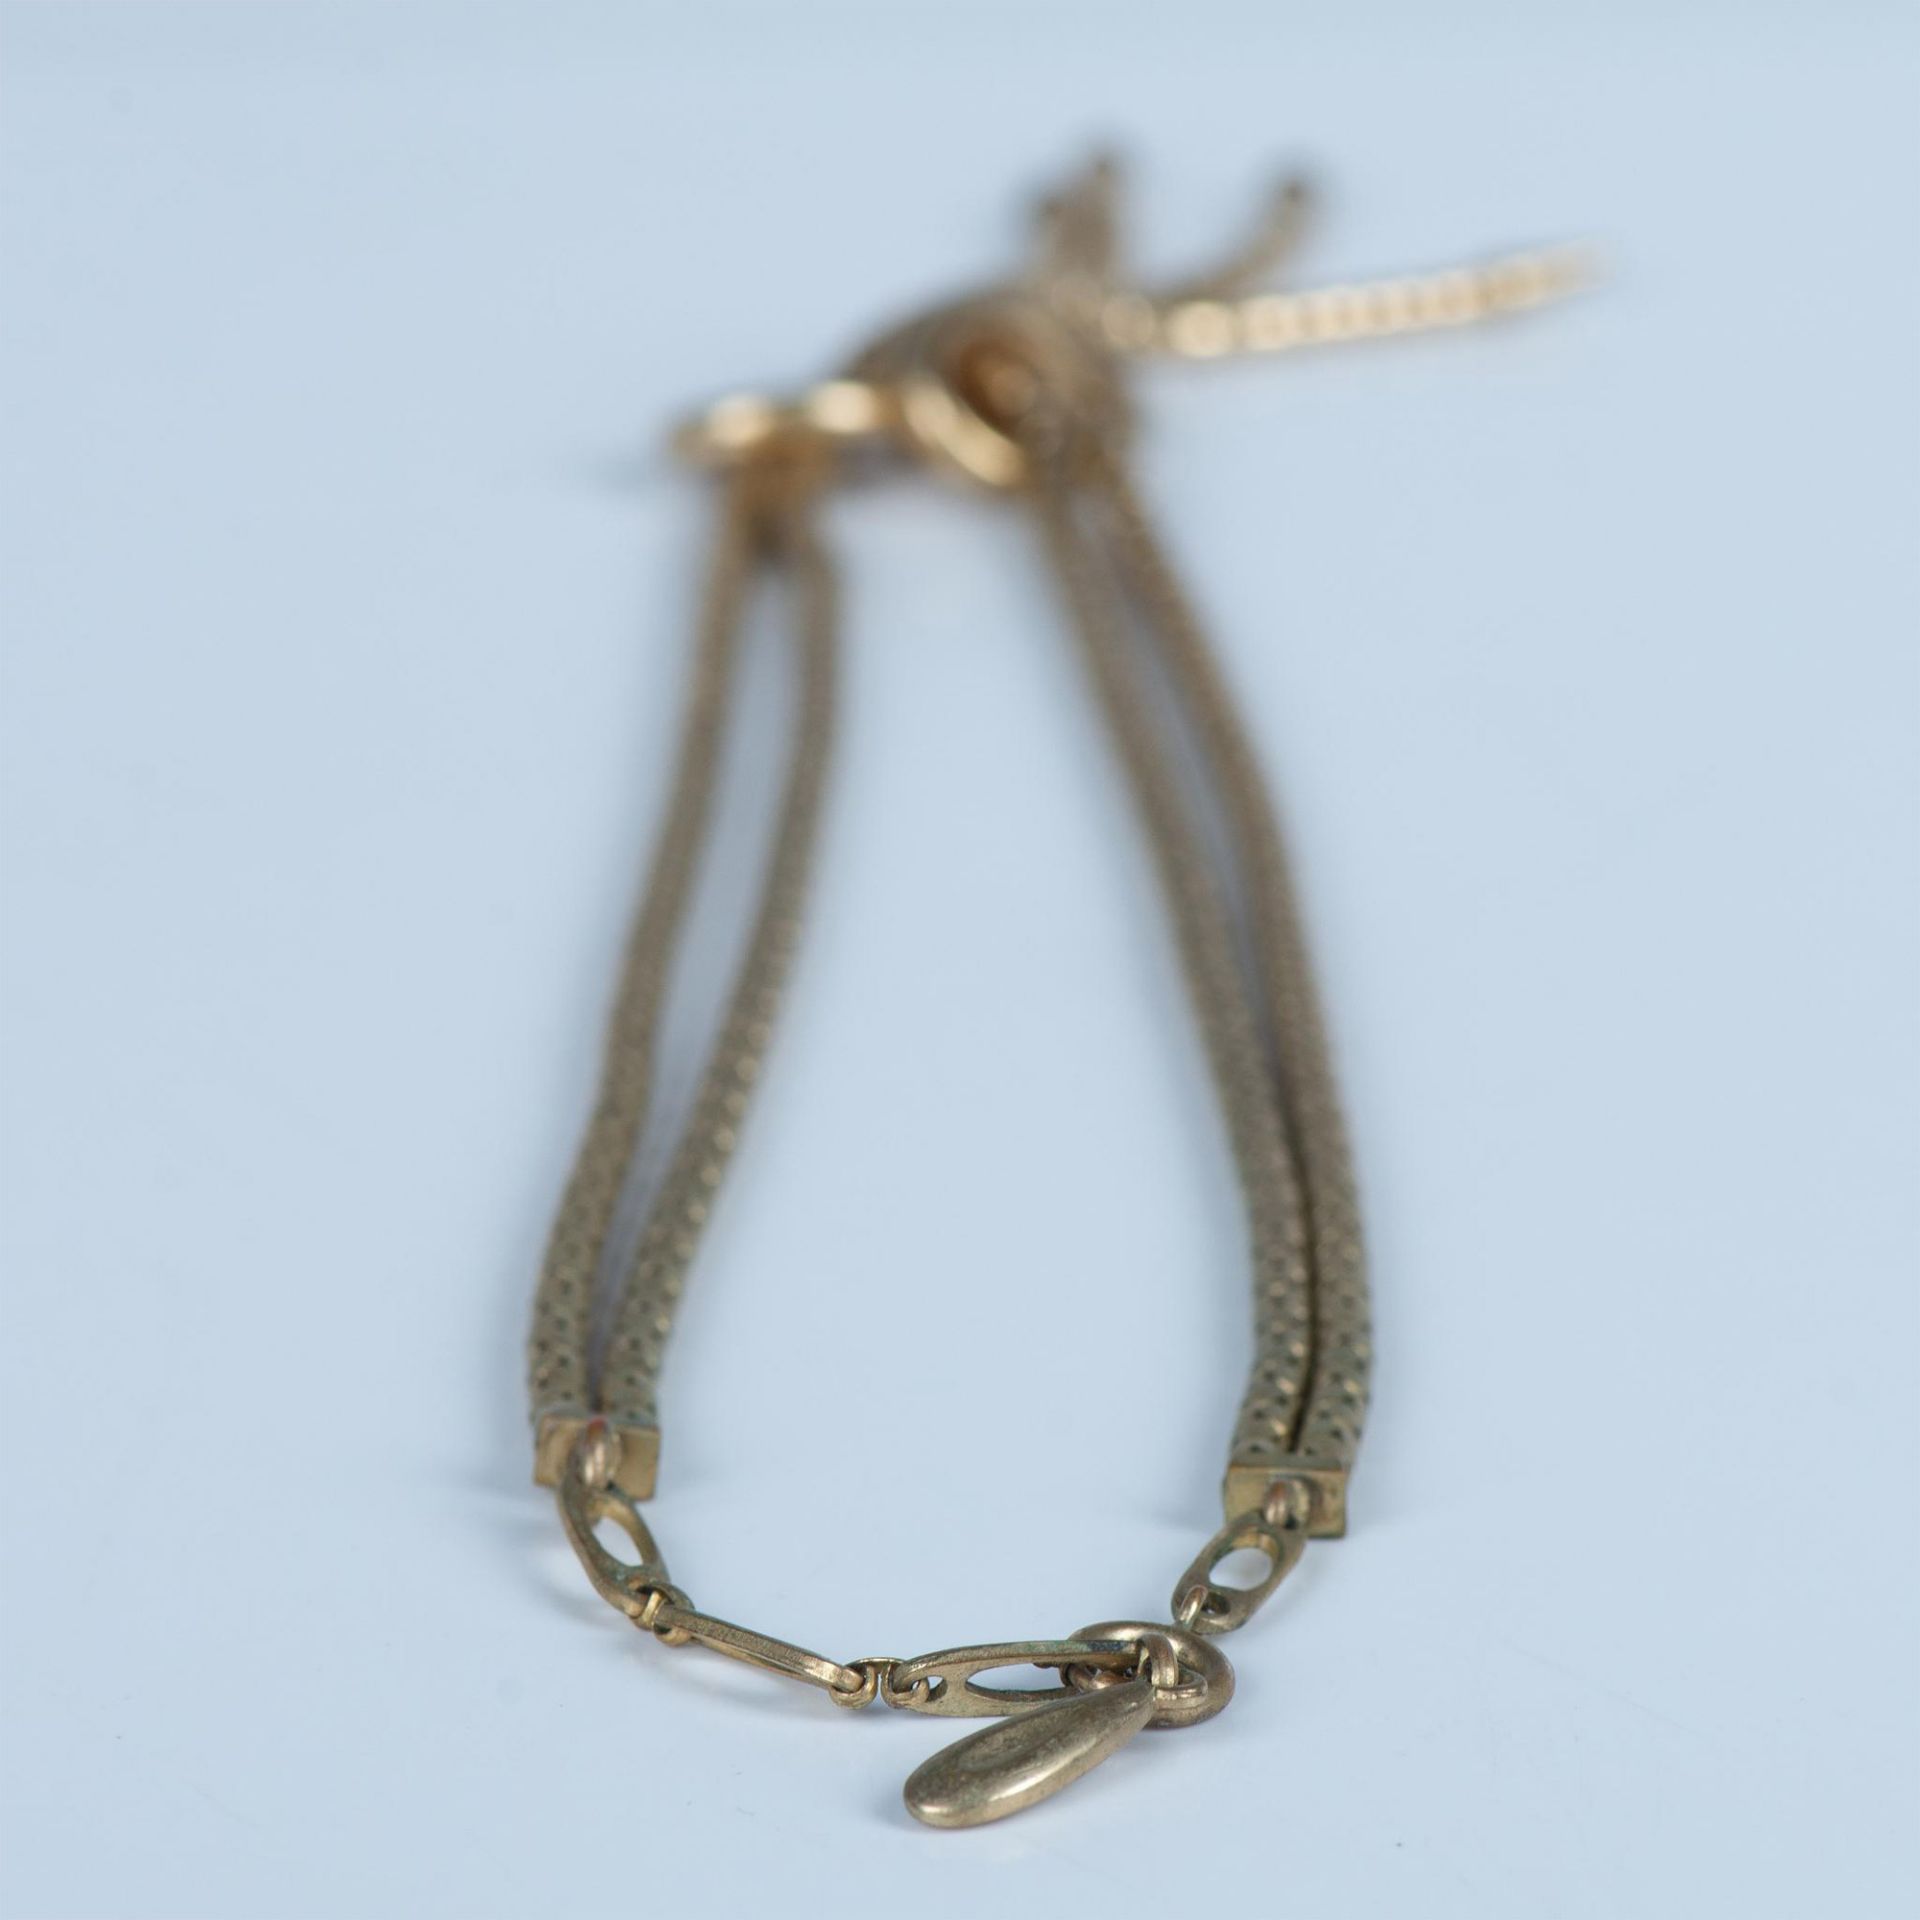 Fancy Gold Metal Lariat Necklace - Image 3 of 3